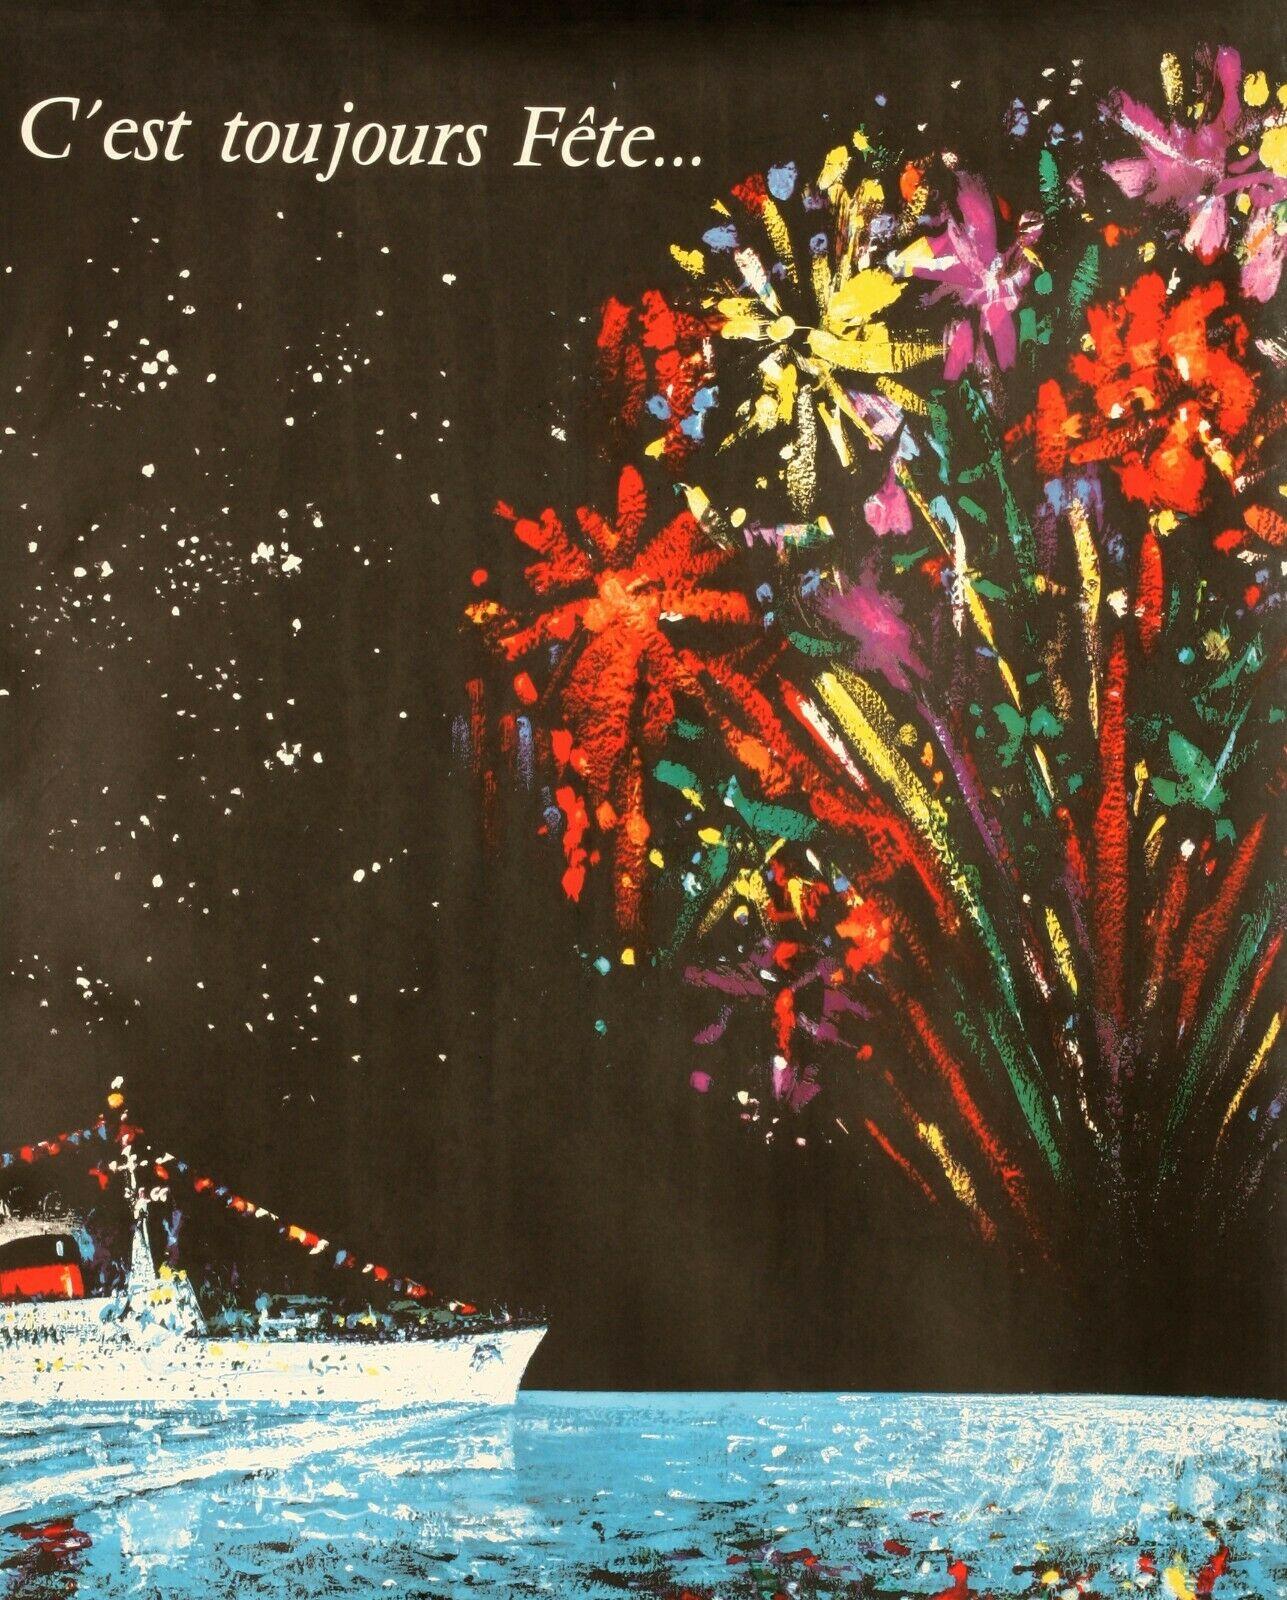 1950s Vintage Poster-Bouvard-At Sea-Cruise Ship-Fireworks Party, 1956

Advertising poster for Compagnie Générale Transatlantique, which offers trips on large ships such as the 